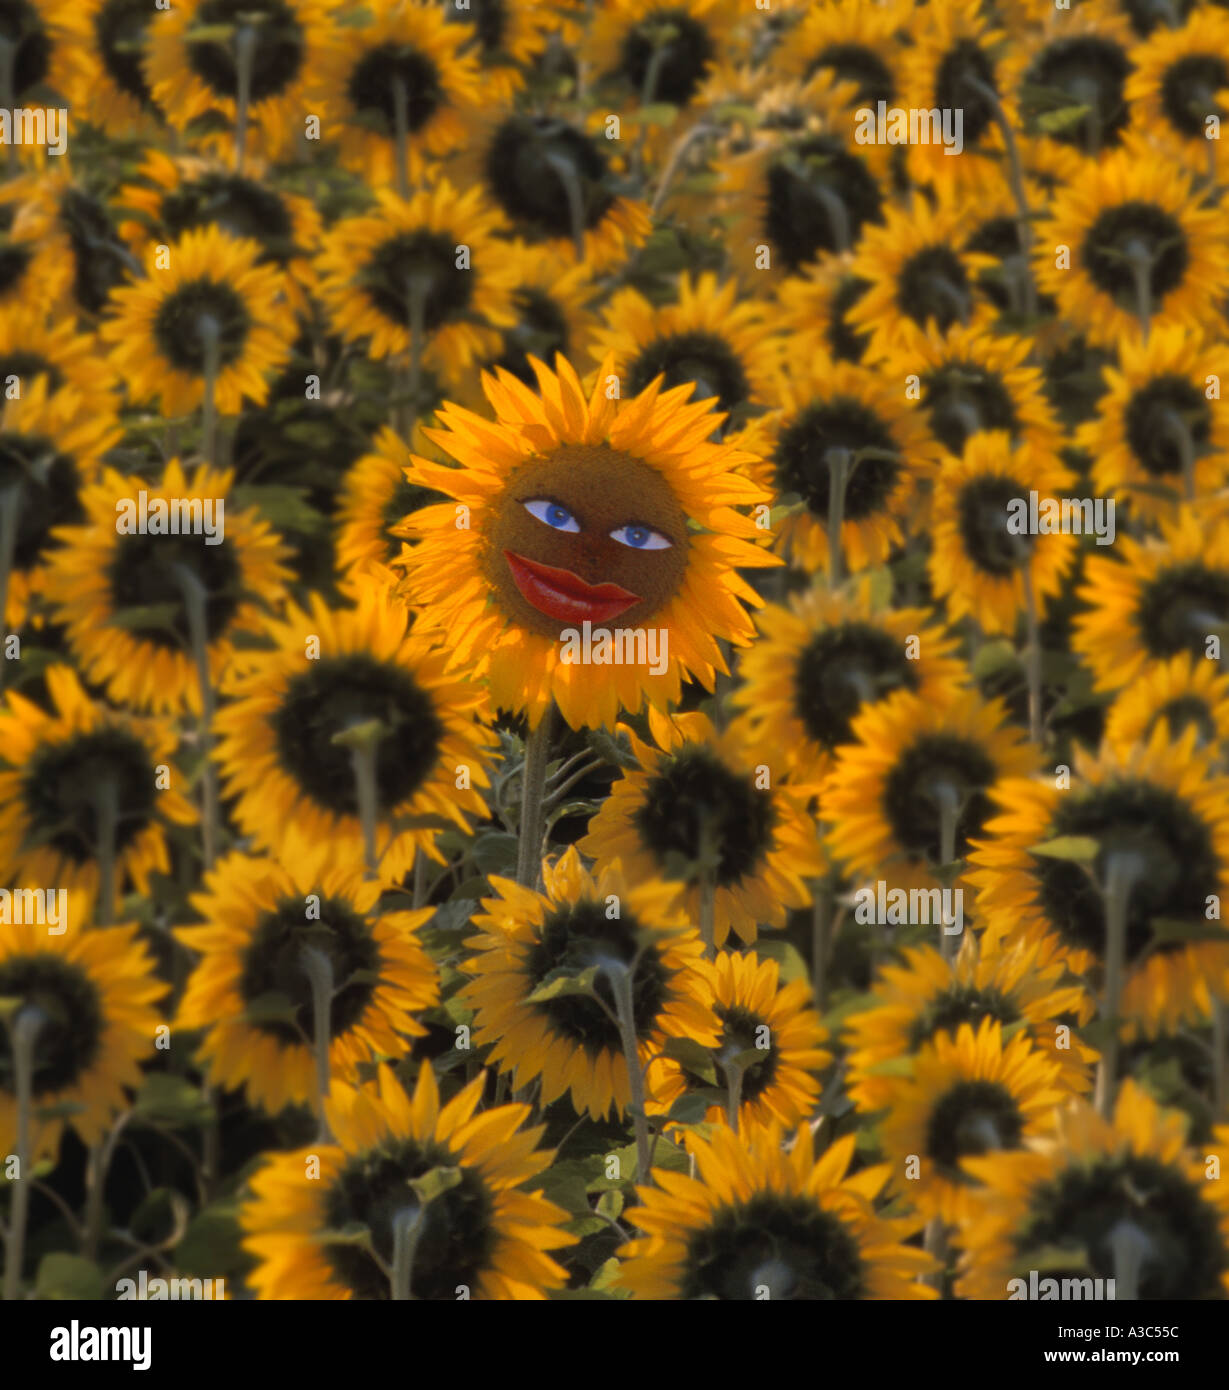 The happy individual sunflower in a sea of sunflowers going the other way Stock Photo